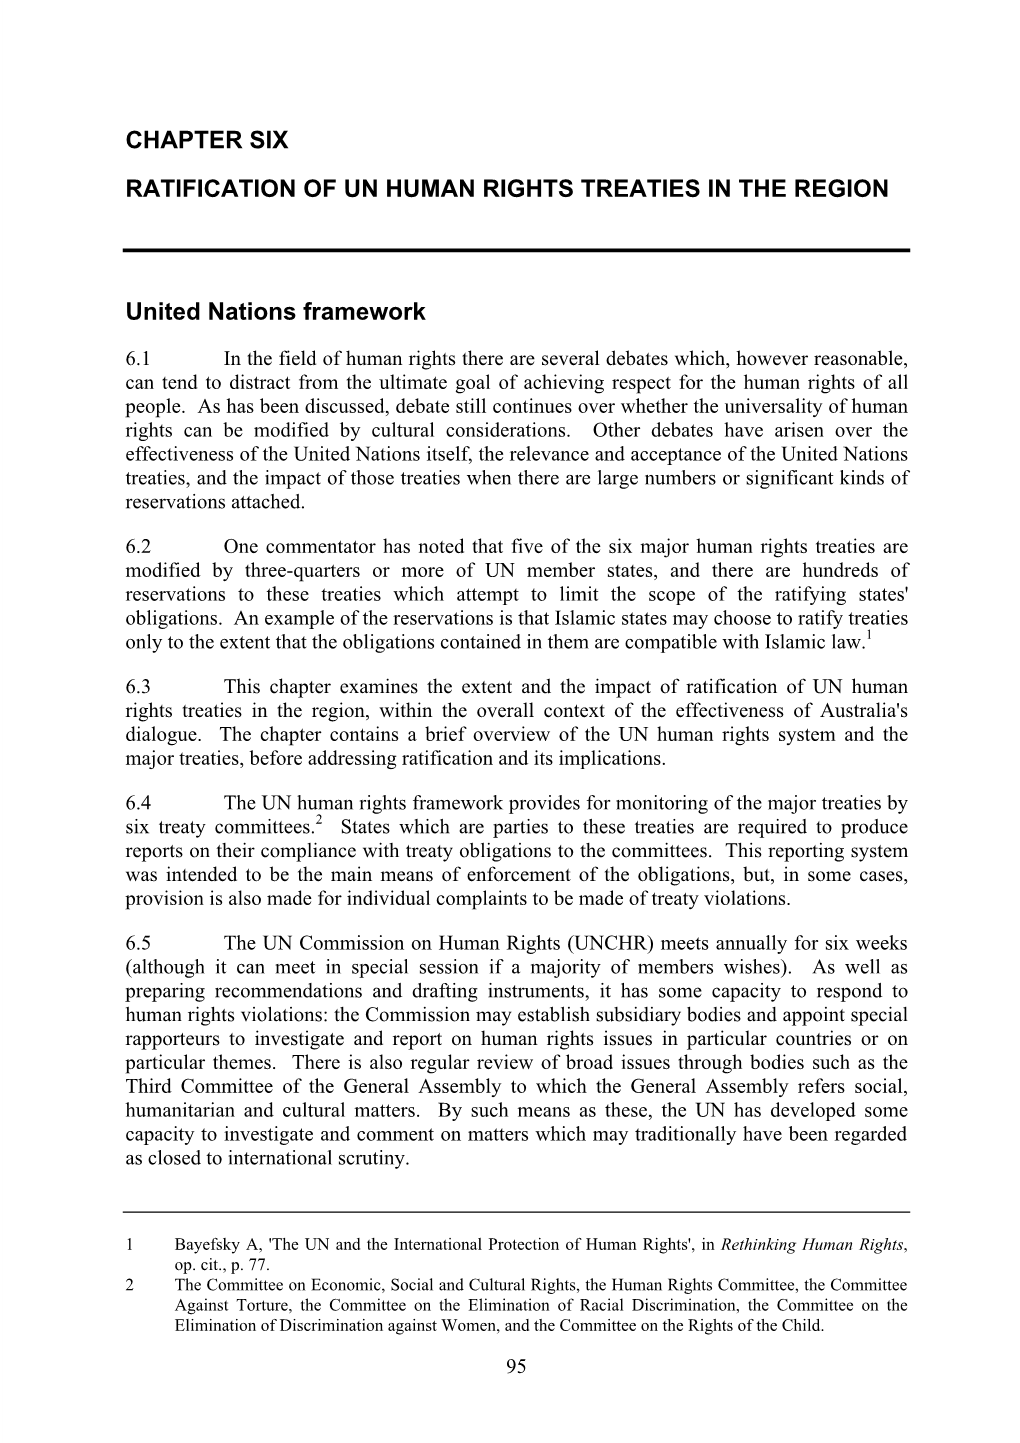 Chapter 6: Ratification of UN Human Rights Treaties in the Region